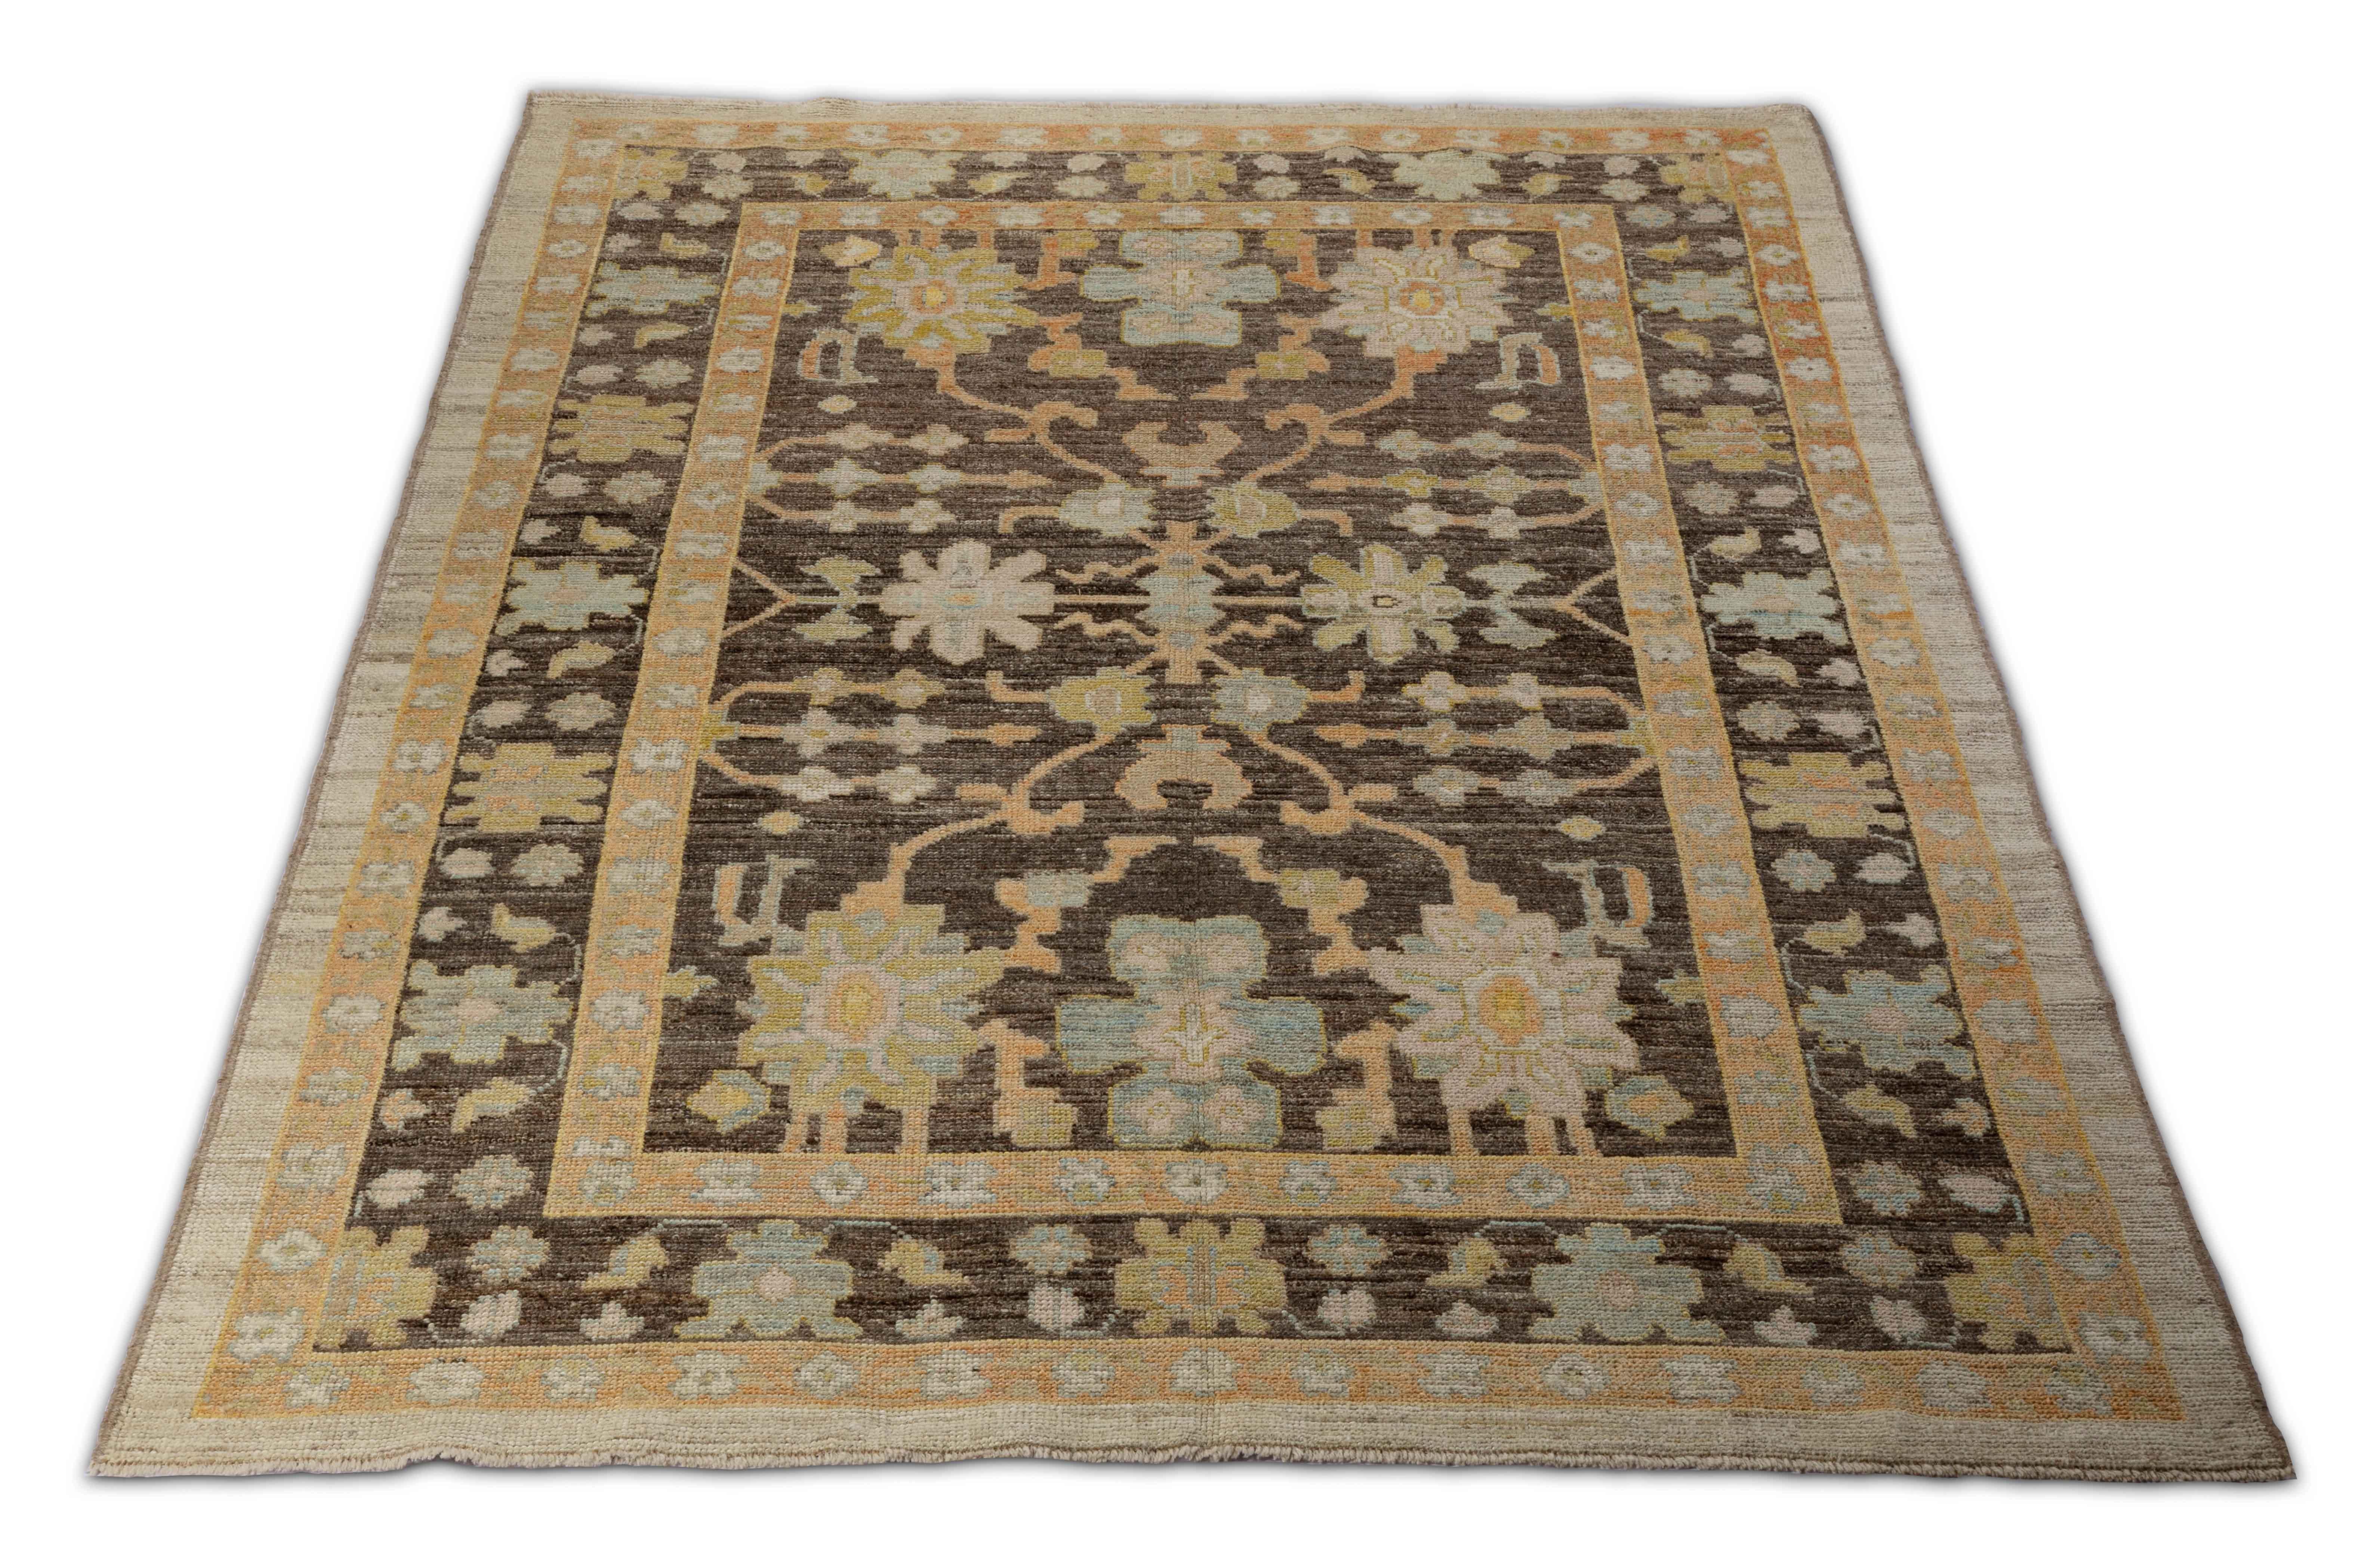 Contemporary Turkish rug made of handwoven sheep’s wool of the finest quality. It’s colored with organic vegetable dyes that are certified safe for humans and pets alike. It features a brown field with flower head details allover associated with